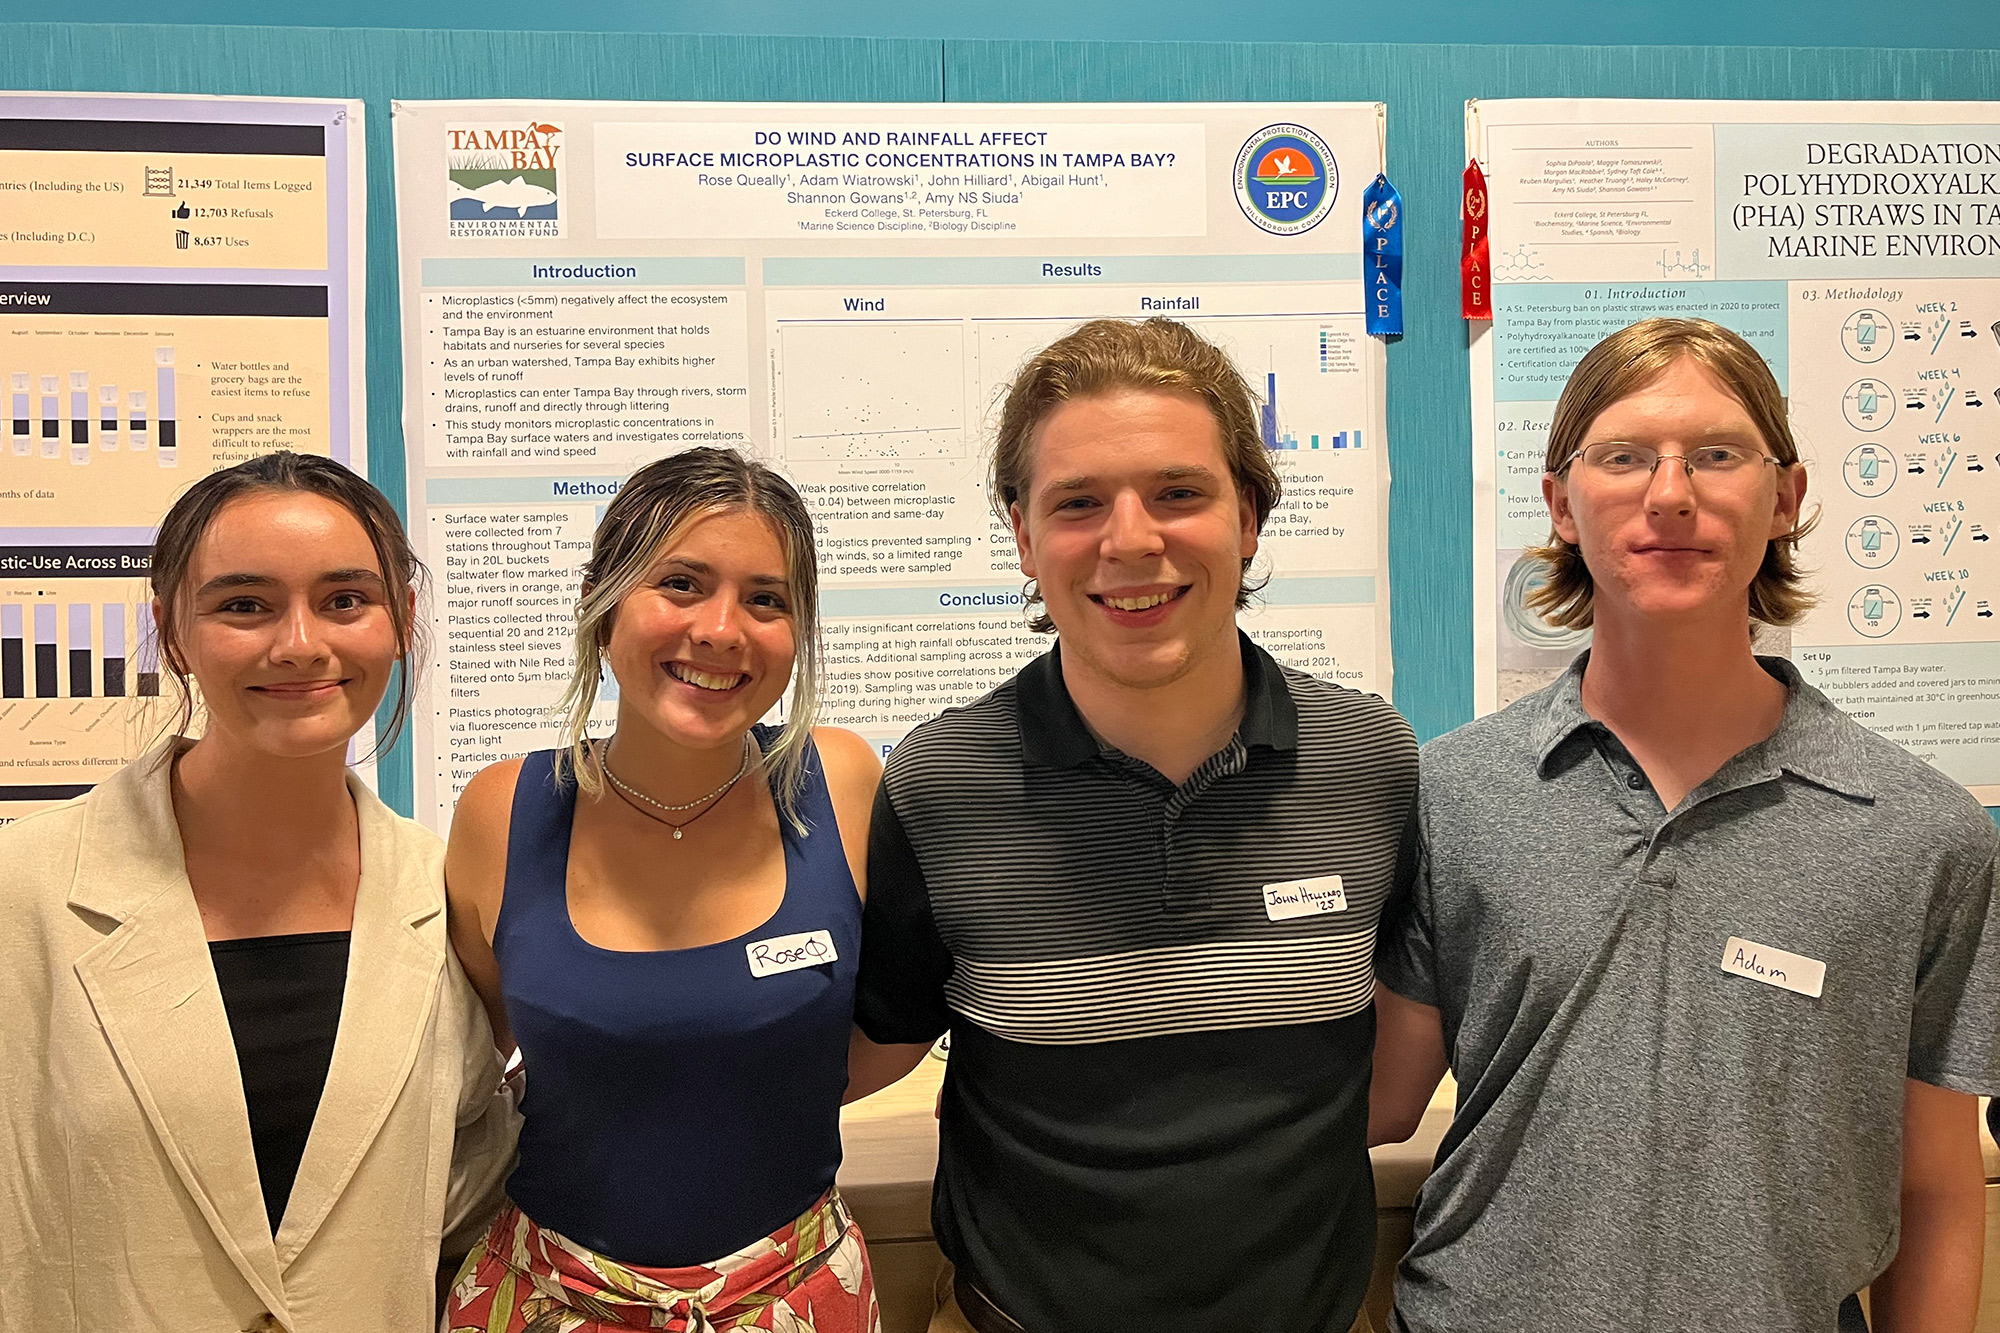 Four students stand side by side in front of a scientific poster